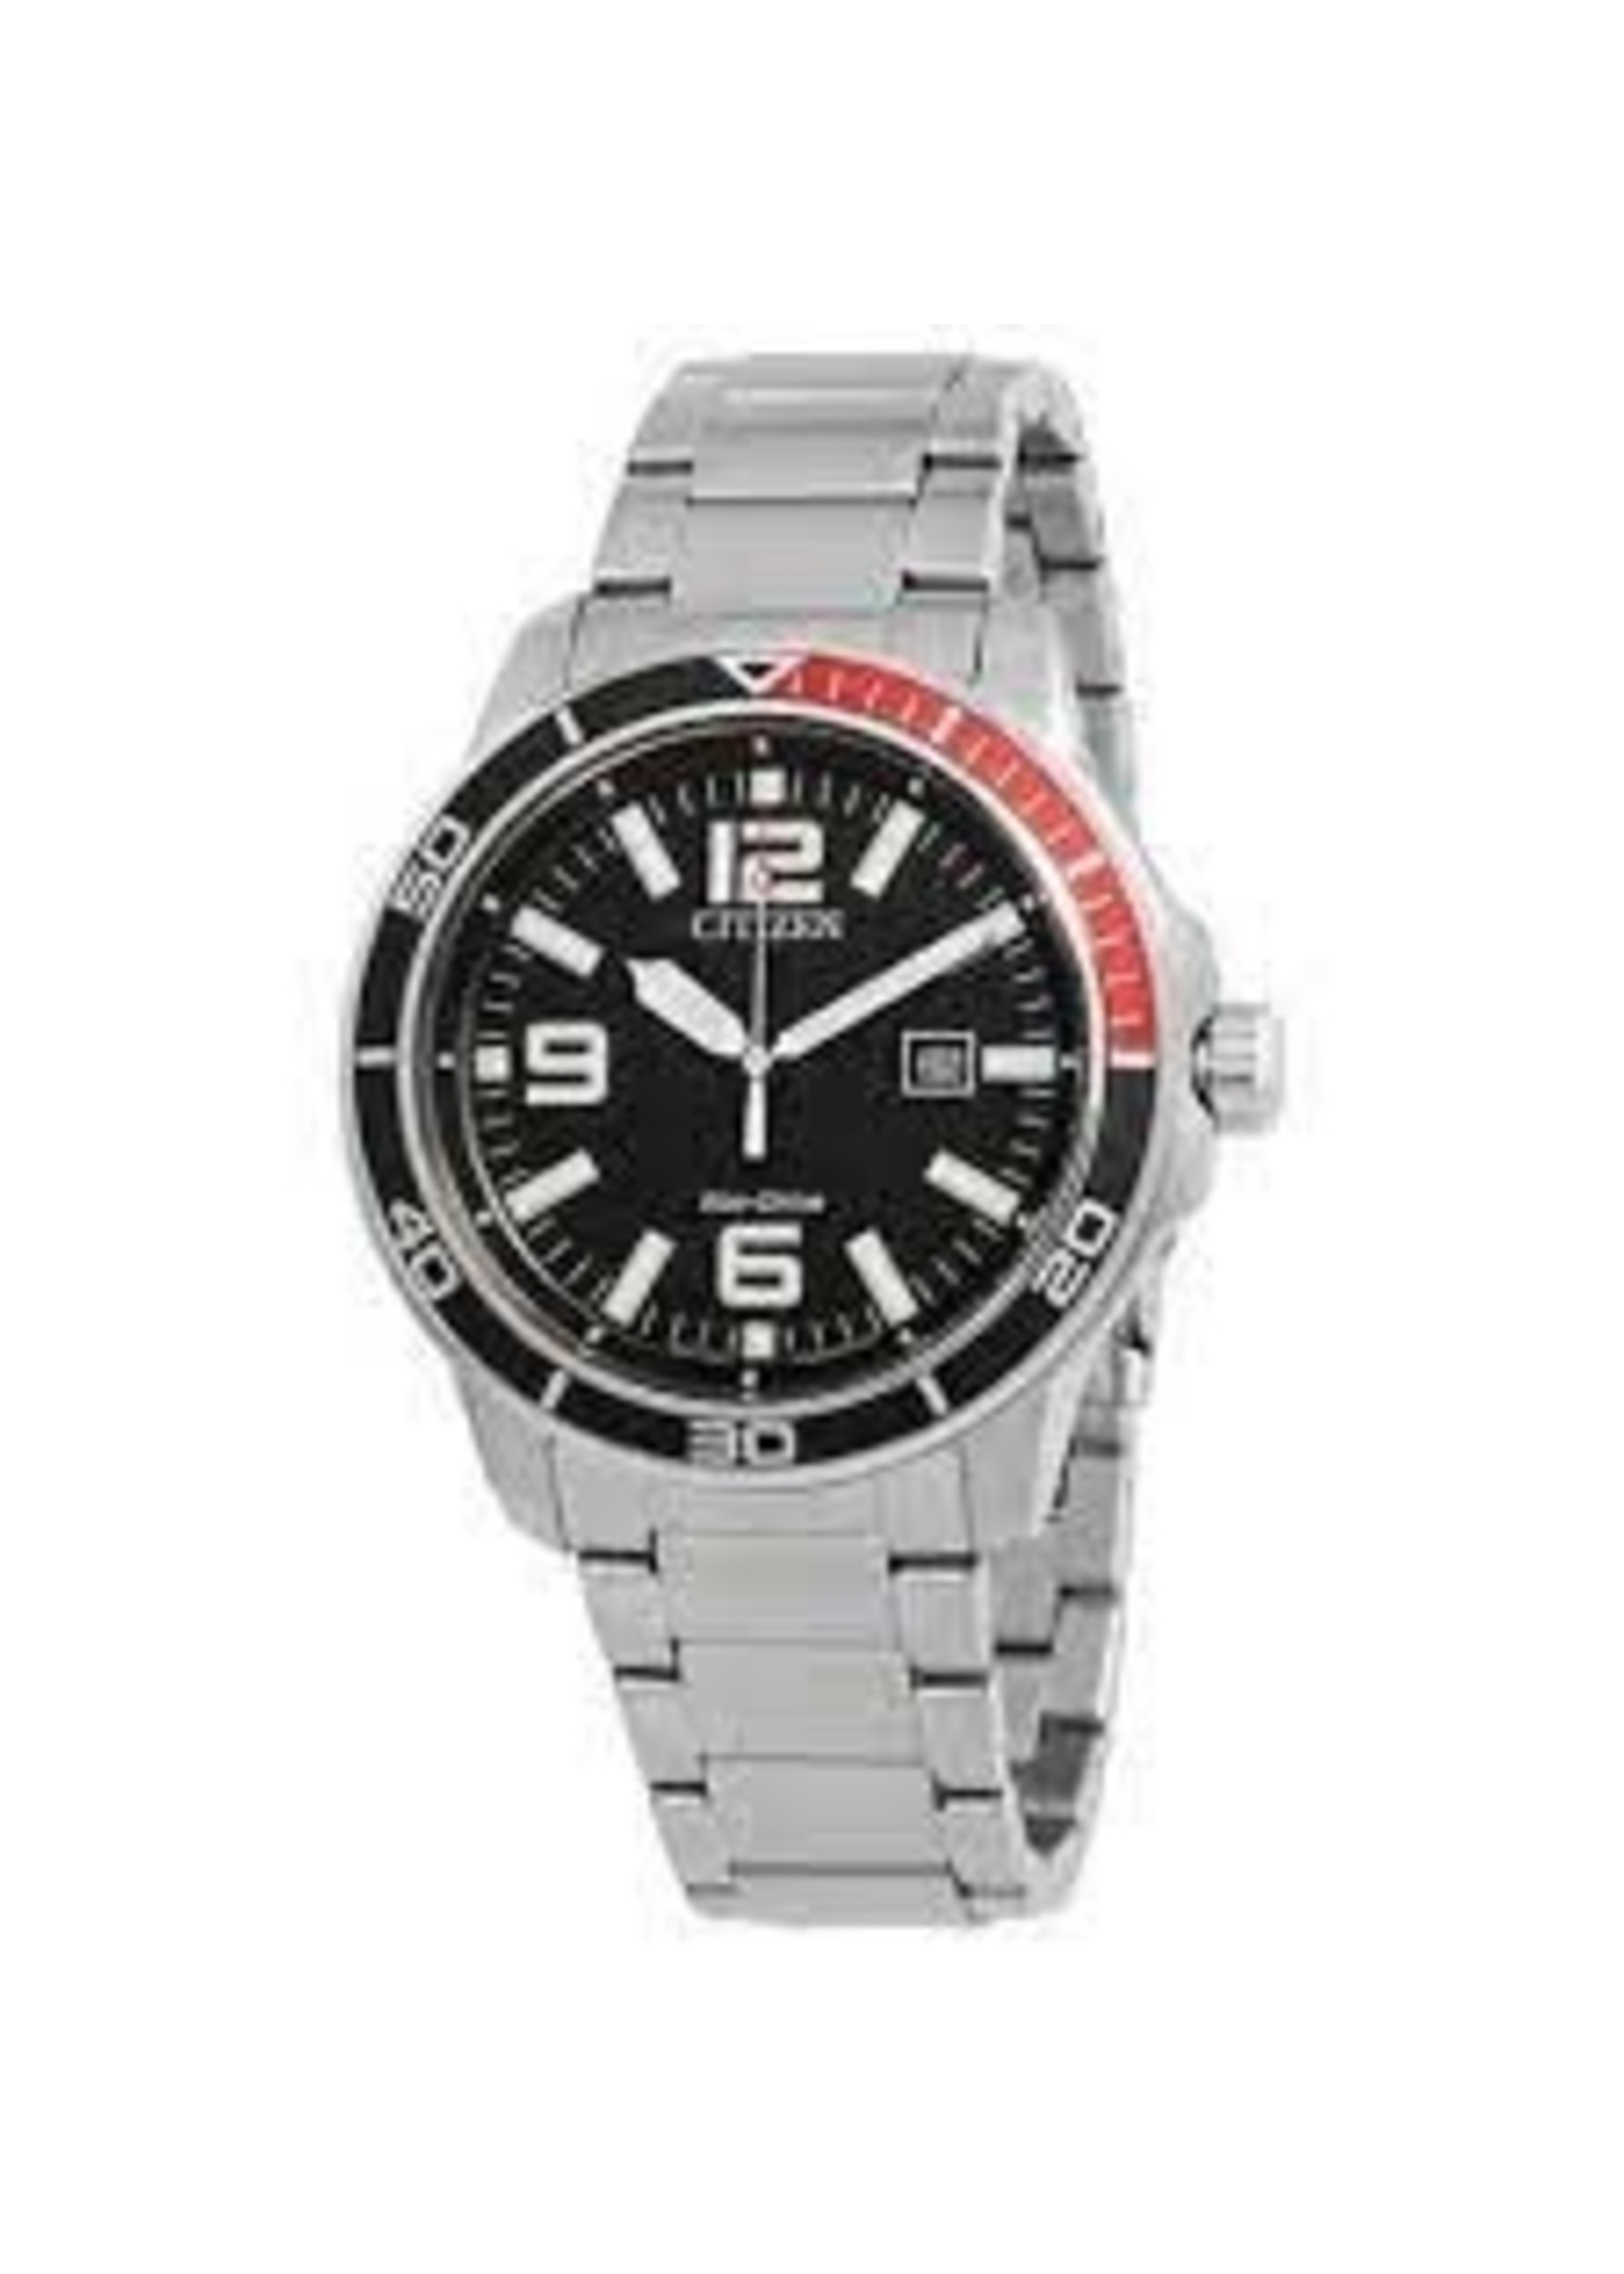 Citizen Citizen Eco-Drive Black Dial Stainless Steel Men's Watch AW1520-51E